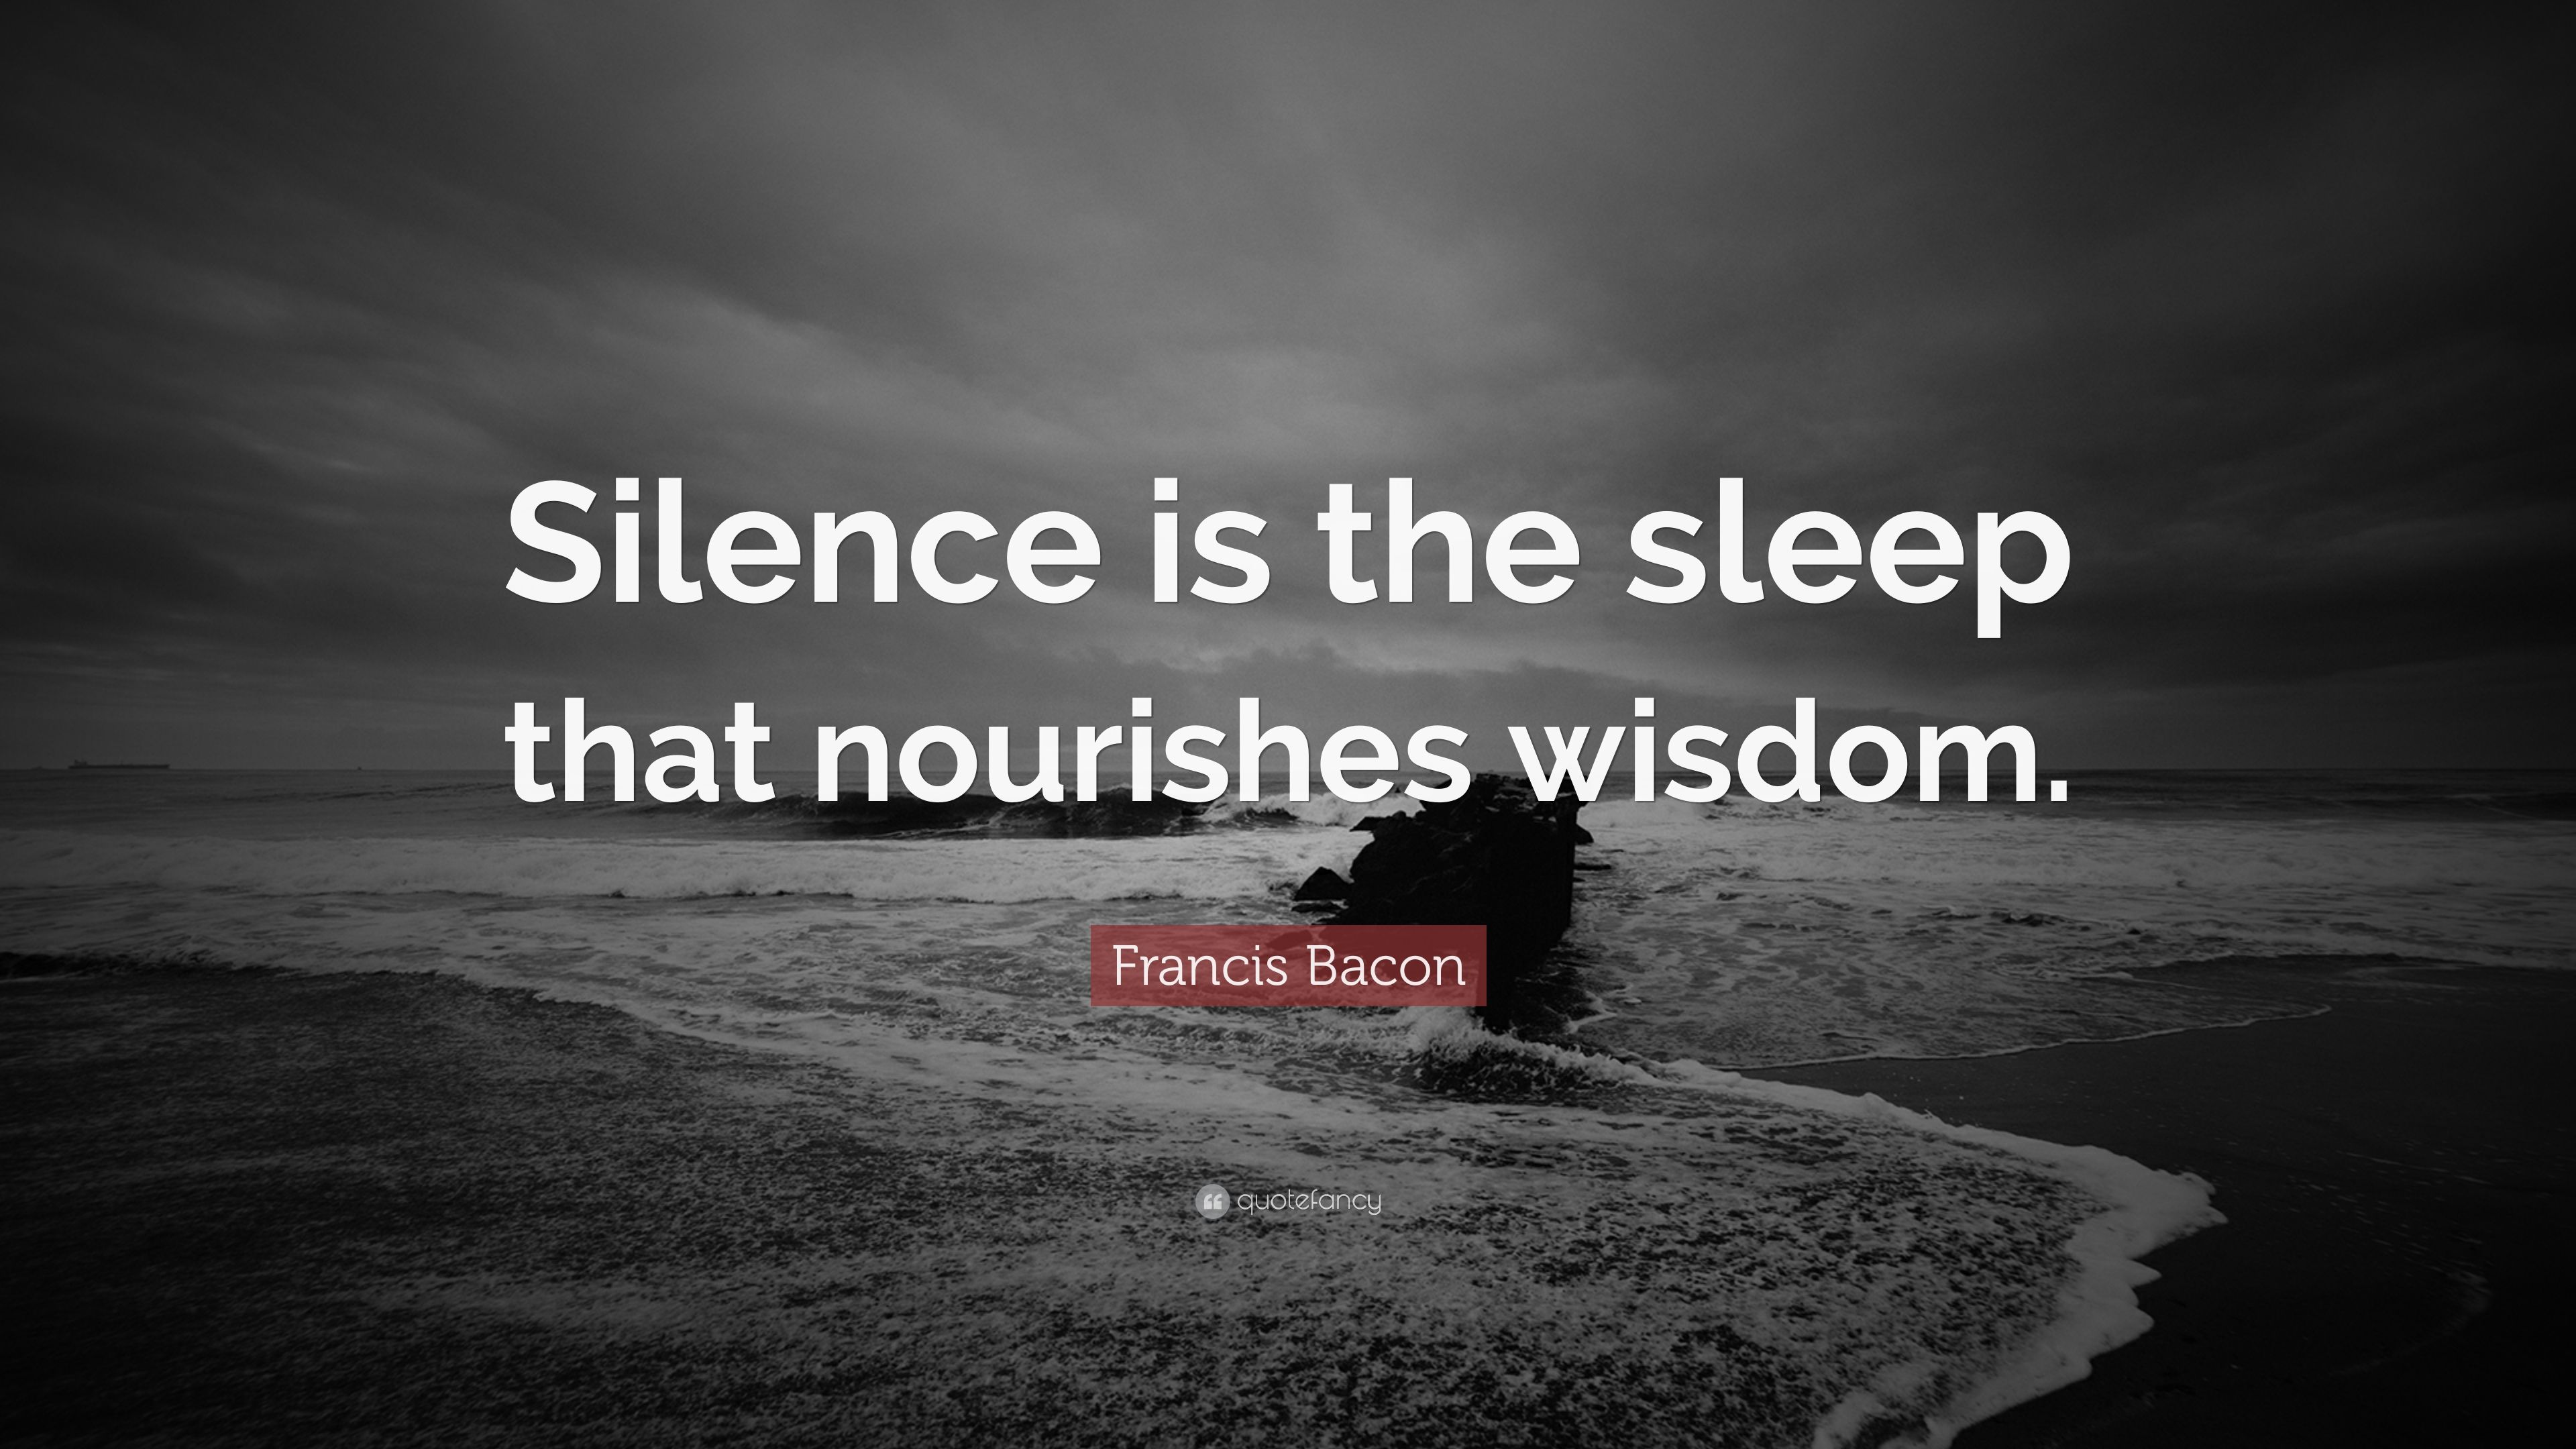 Francis Bacon Quote: “Silence is the sleep that nourishes wisdom